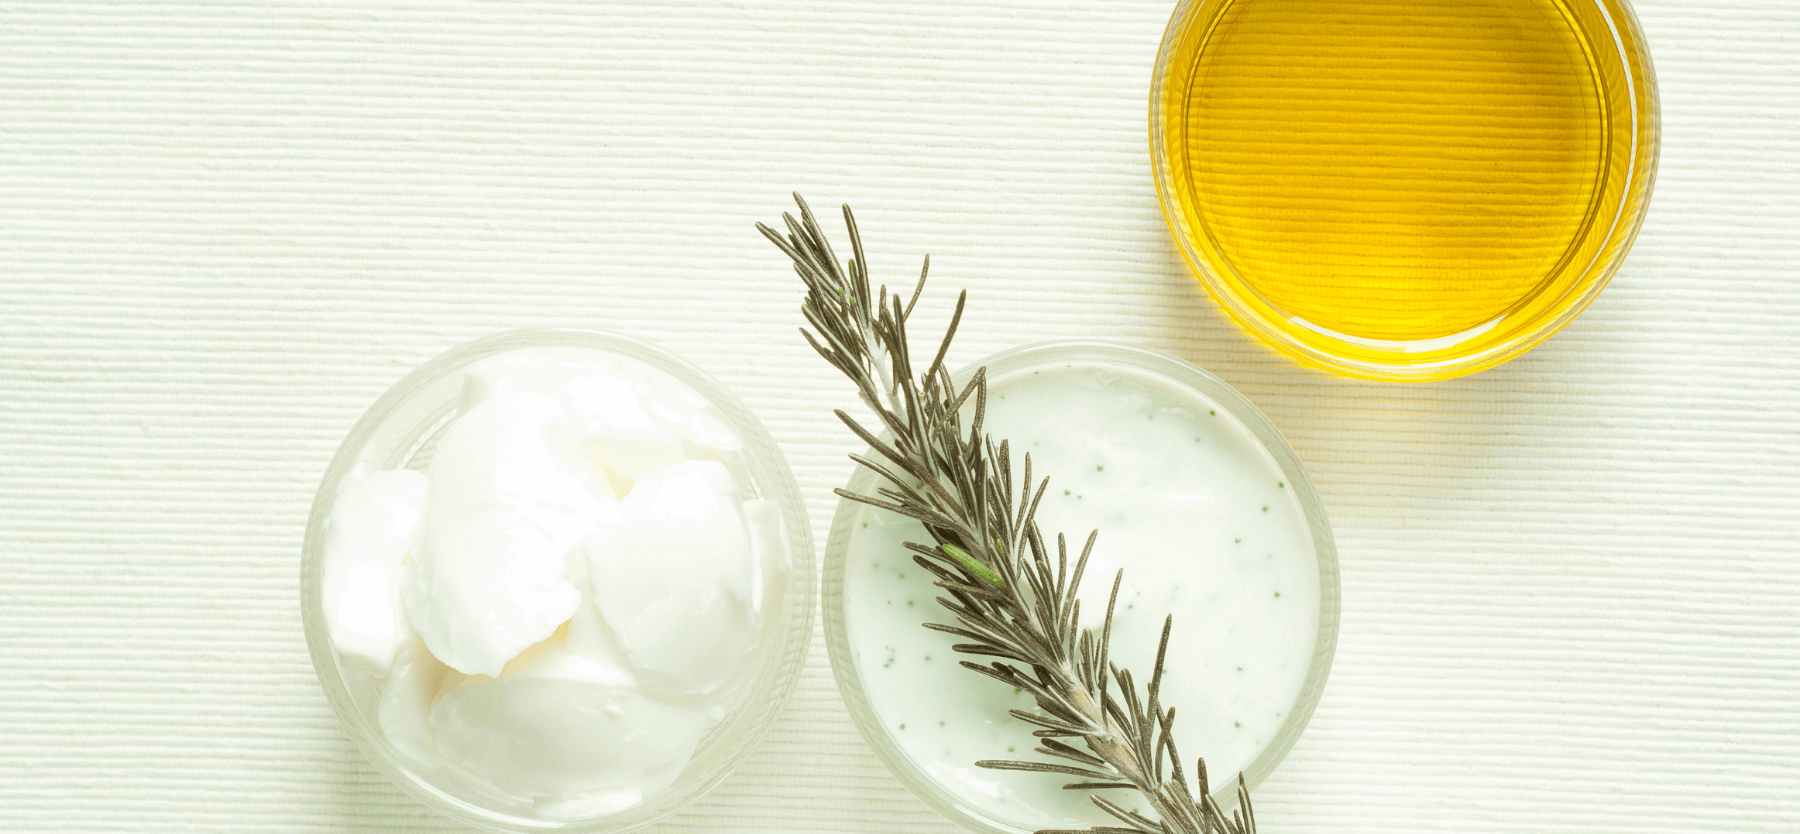 Face Oil vs. Face Cream: The Great Debate for Your Face!